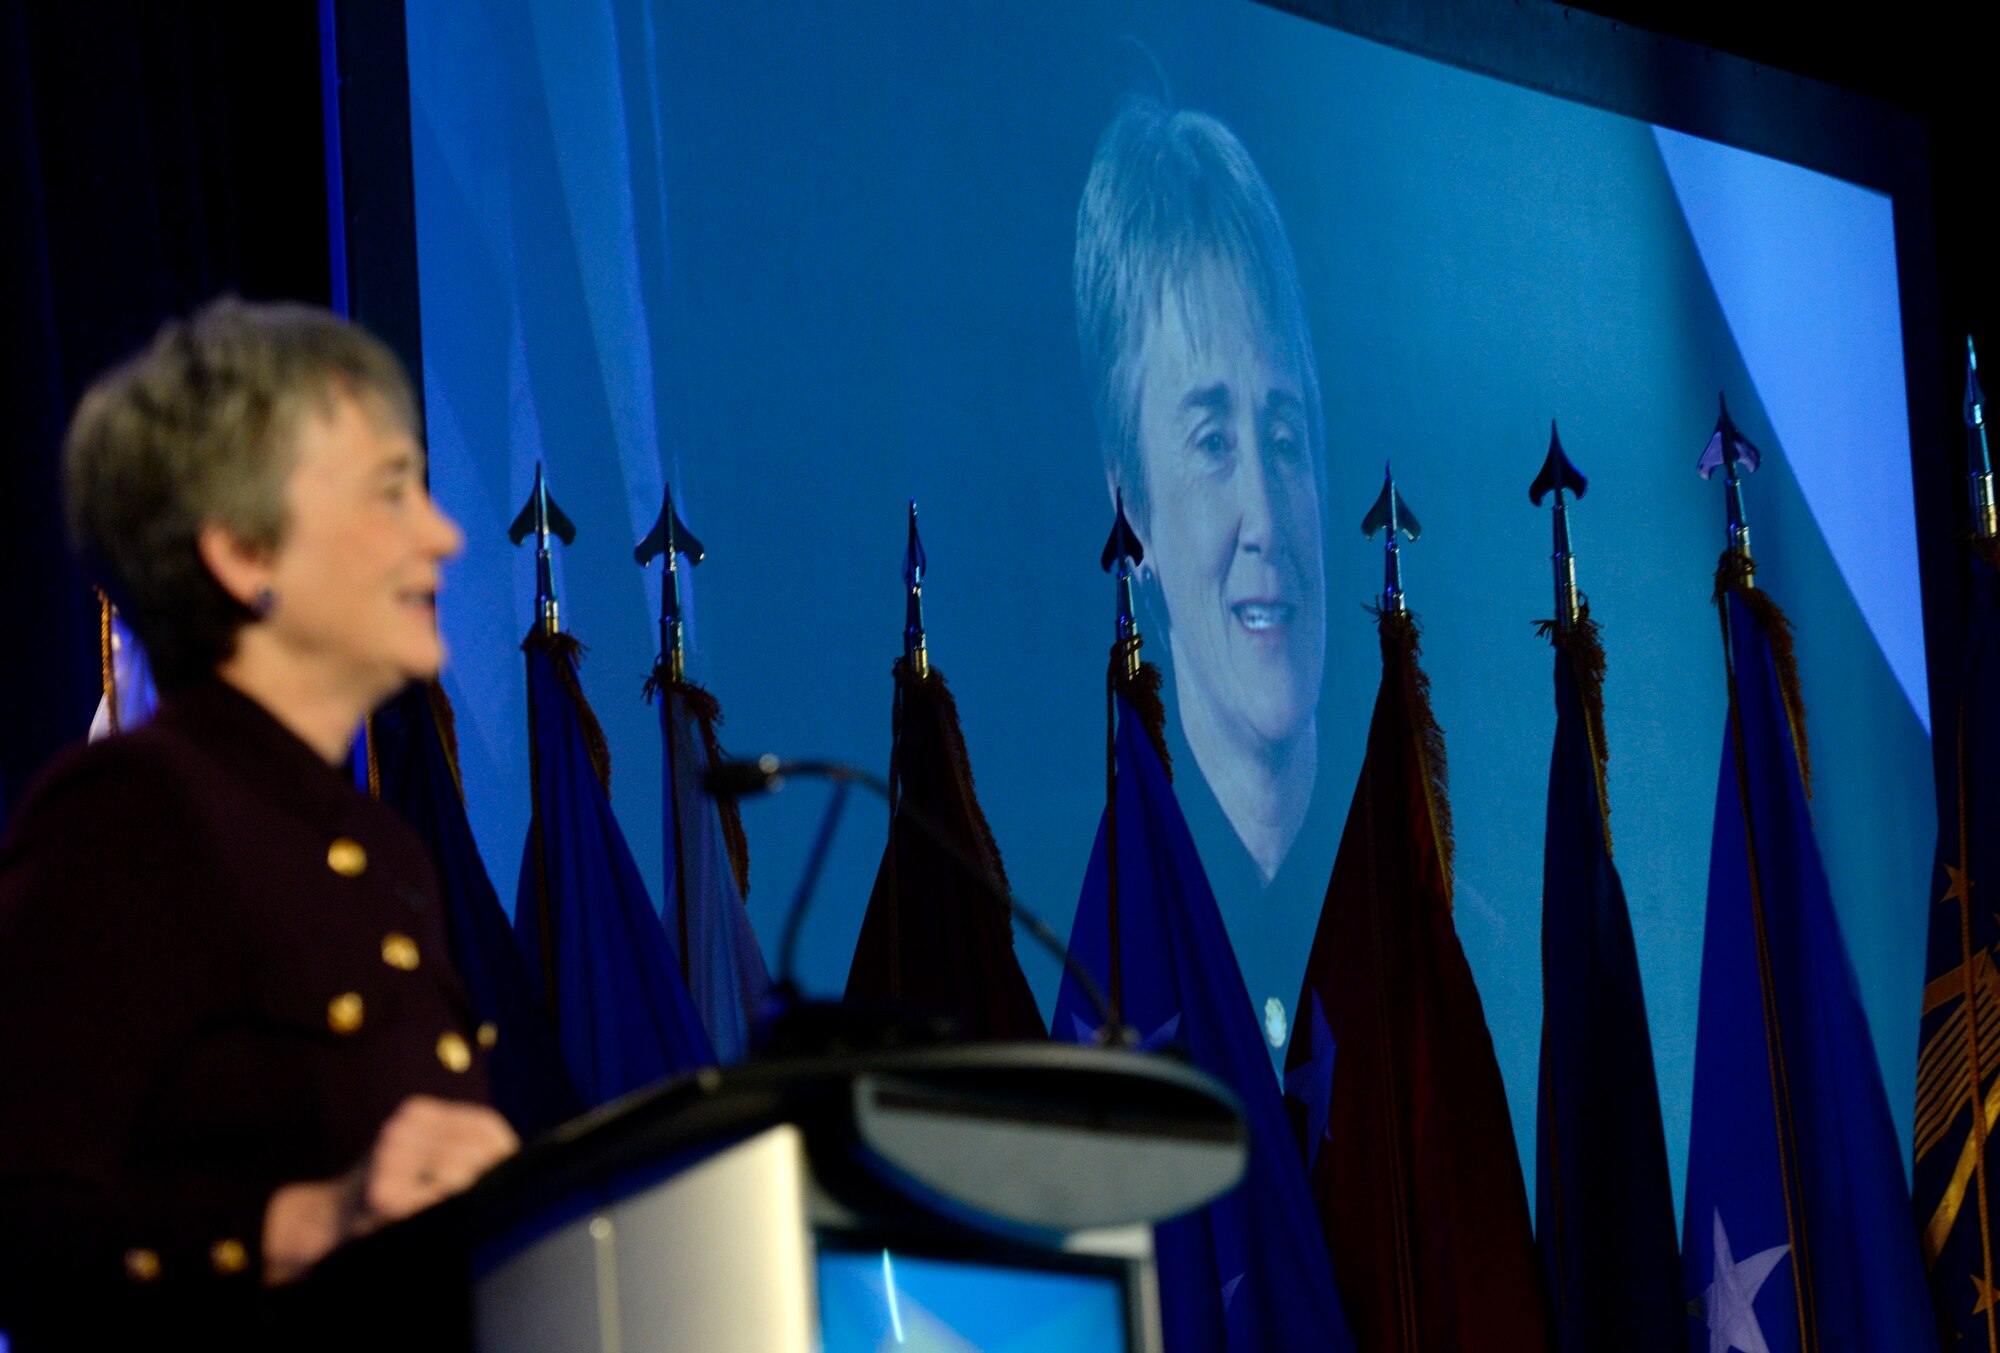 Secretary of the Air Force Heather Wilson delivers the keynote address during the 2017 Logistics Officer Association Symposium in Washington D.C., Nov. 17, 2017. During her remarks Wilson discussed how logistics and innovation contribute to the success of the Air Force. (U.S. Air Force photo by Staff Sgt. Rusty Frank)